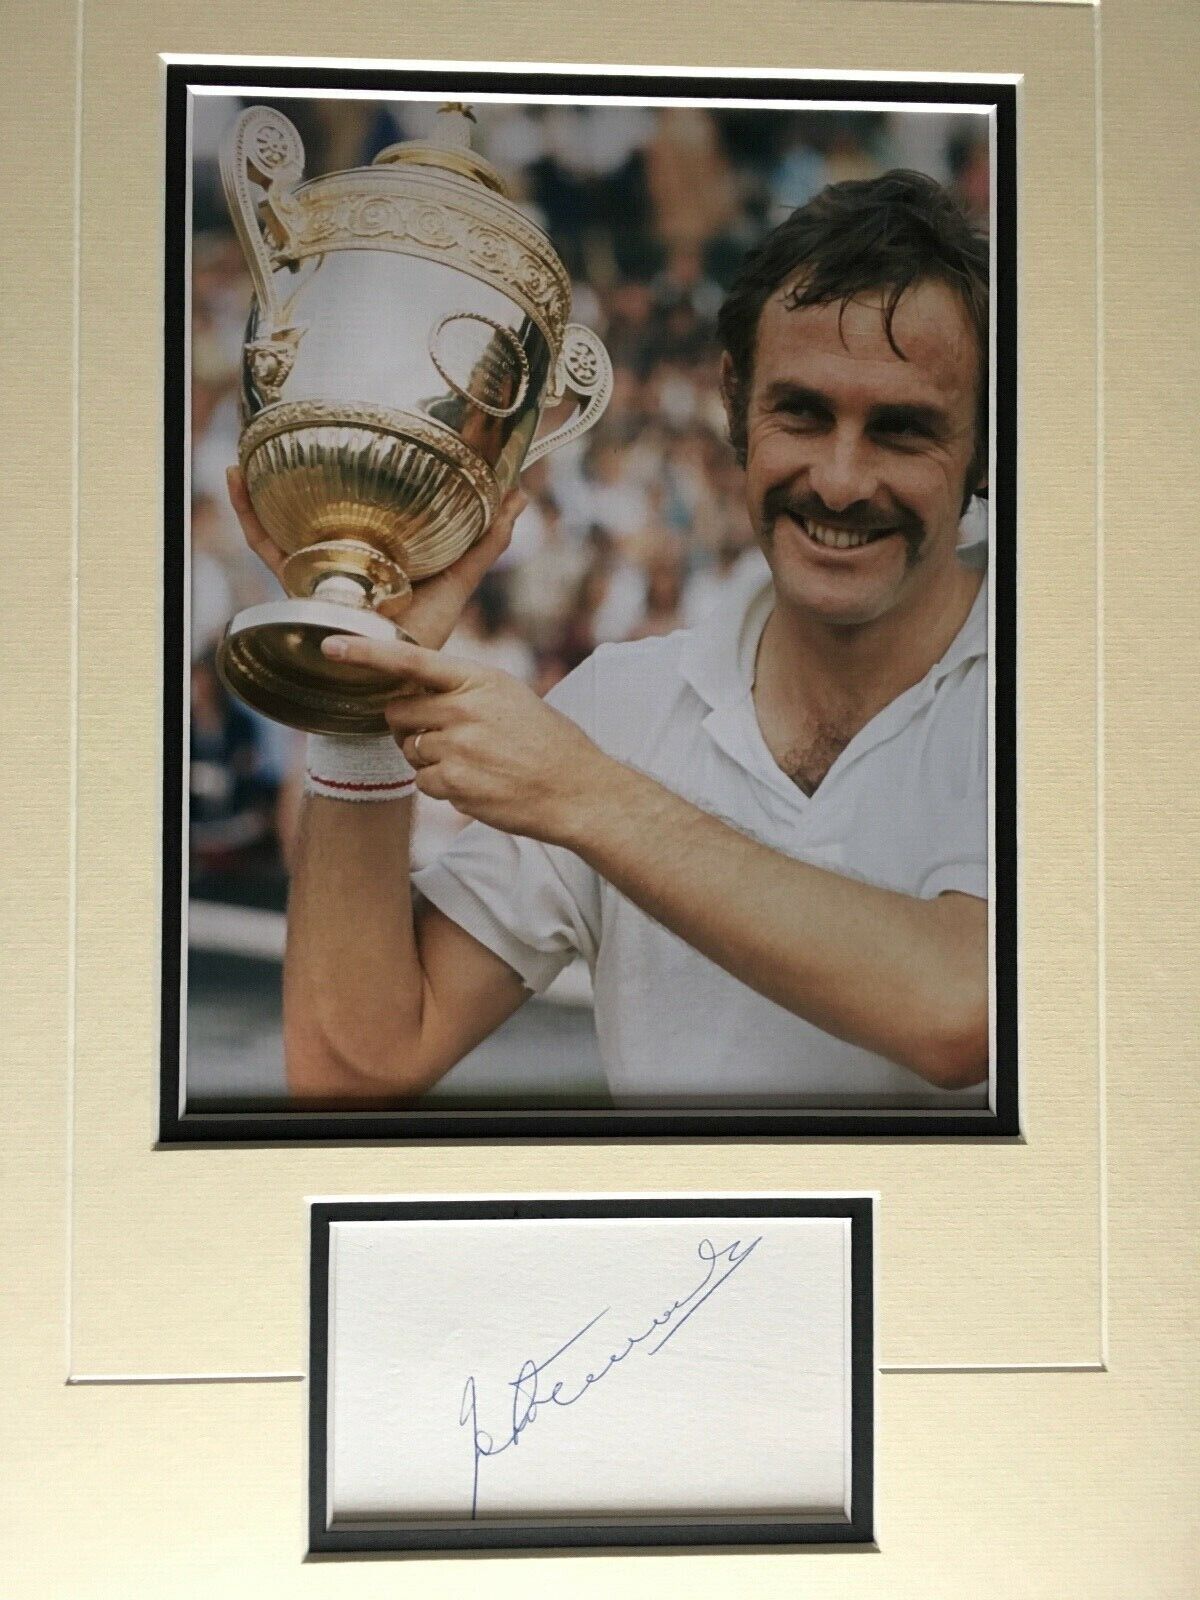 JOHN NEWCOMBE - GREAT AUSTRALIAN TENNIS PLAYER - SIGNED COLOUR Photo Poster painting DISPLAY